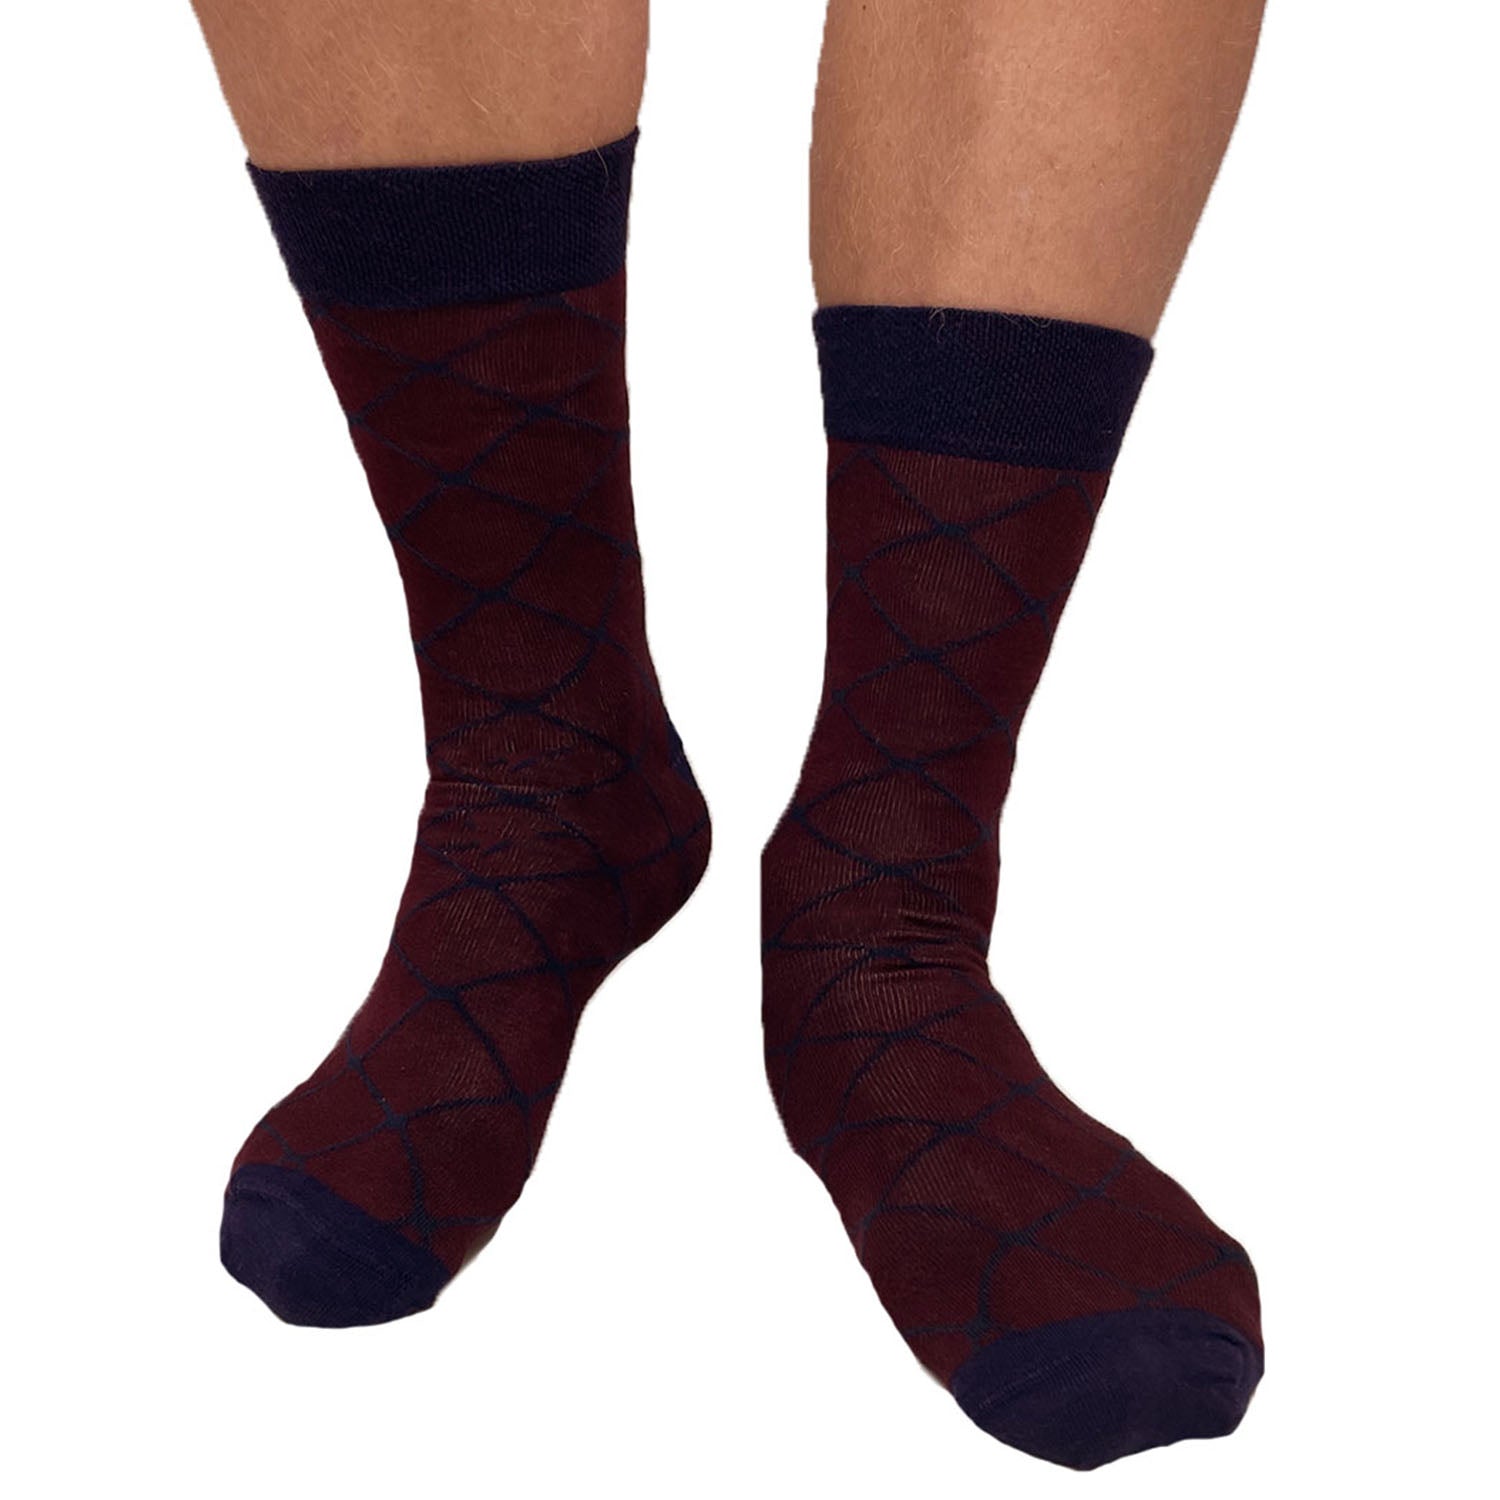 Red fashion sock from tag socks